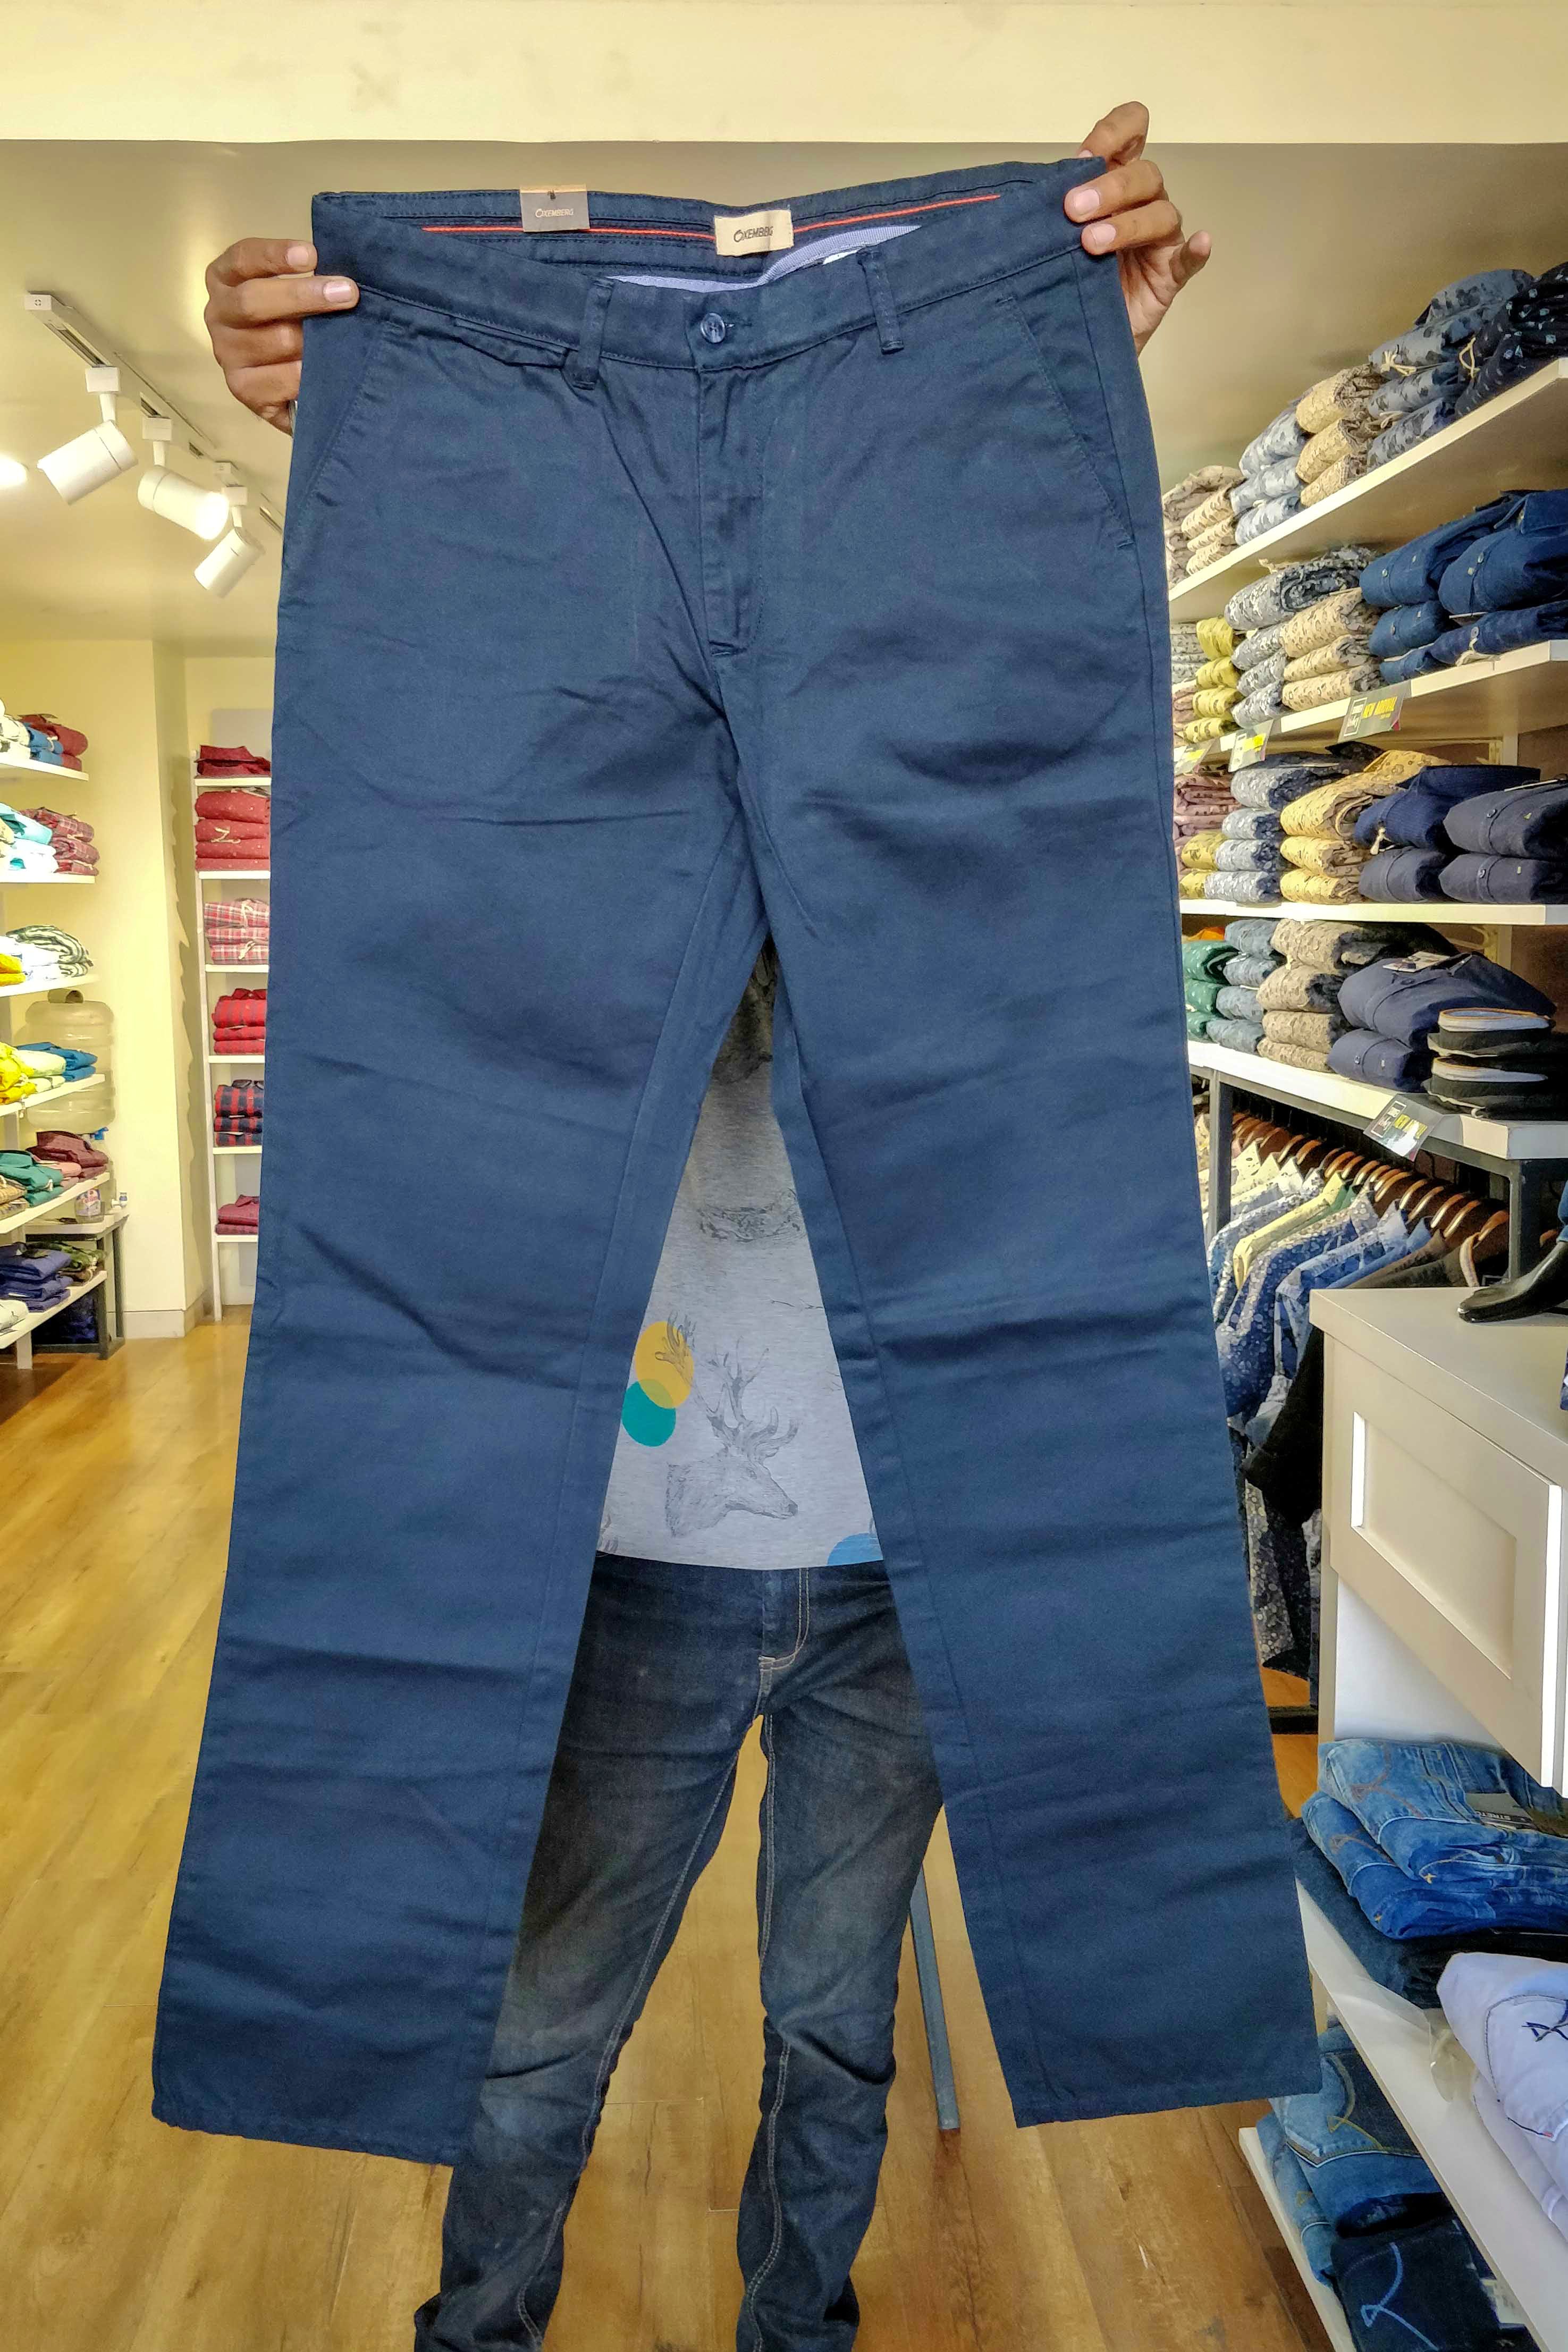 oxemberg jeans company